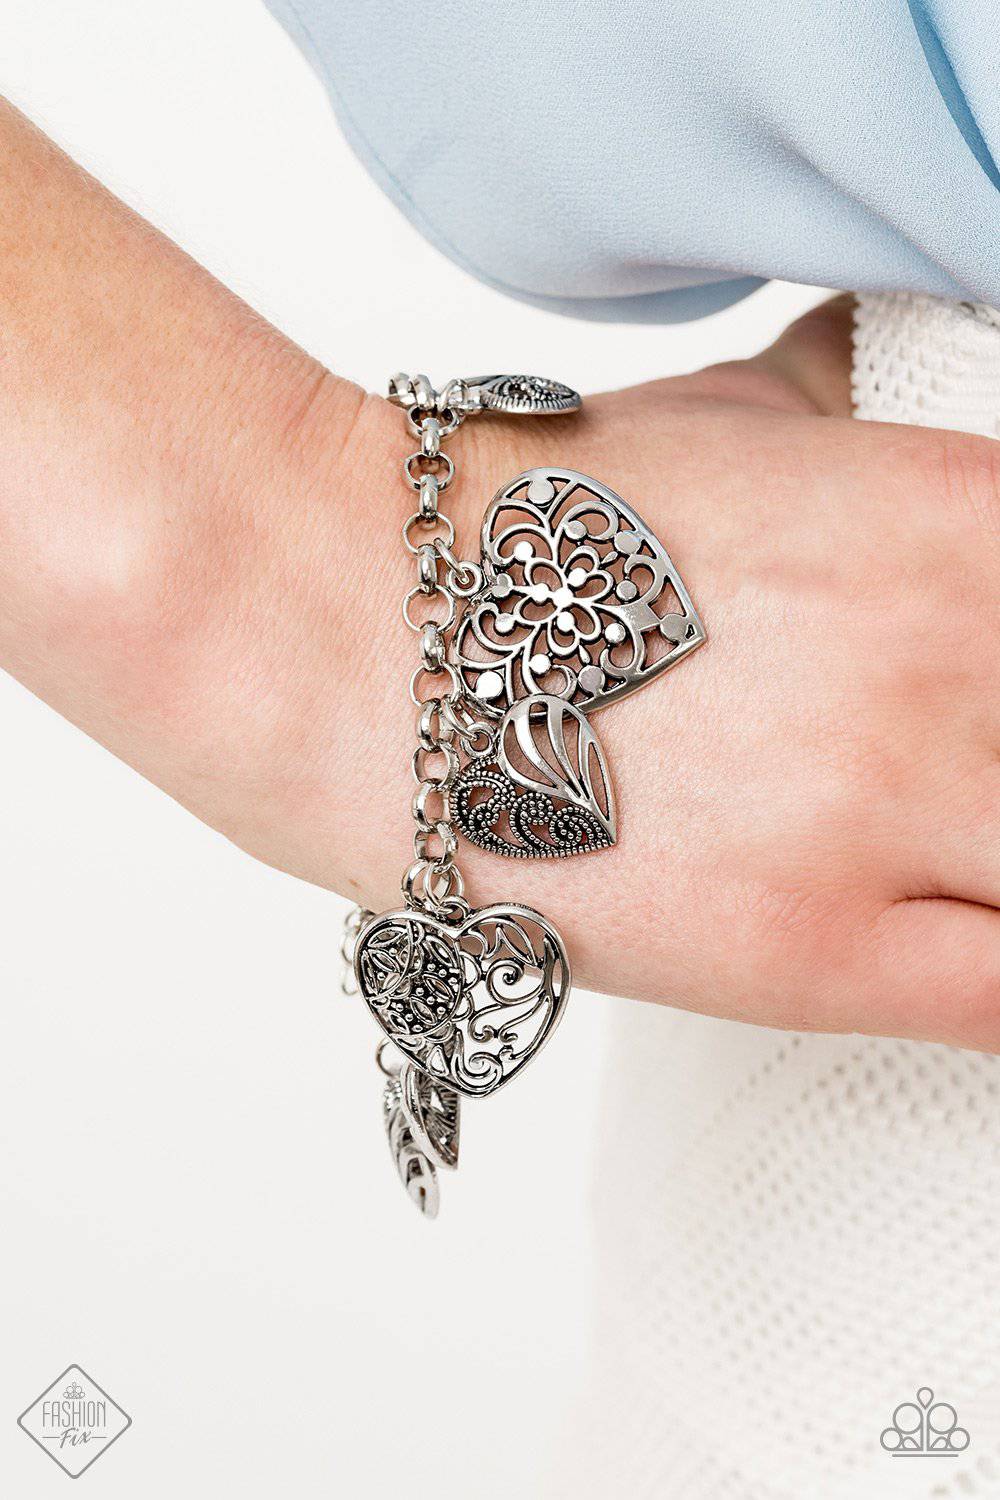 Completely Devoted - Silver Heart Bracelet - Paparazzi Accessories - GlaMarous Titi Jewels